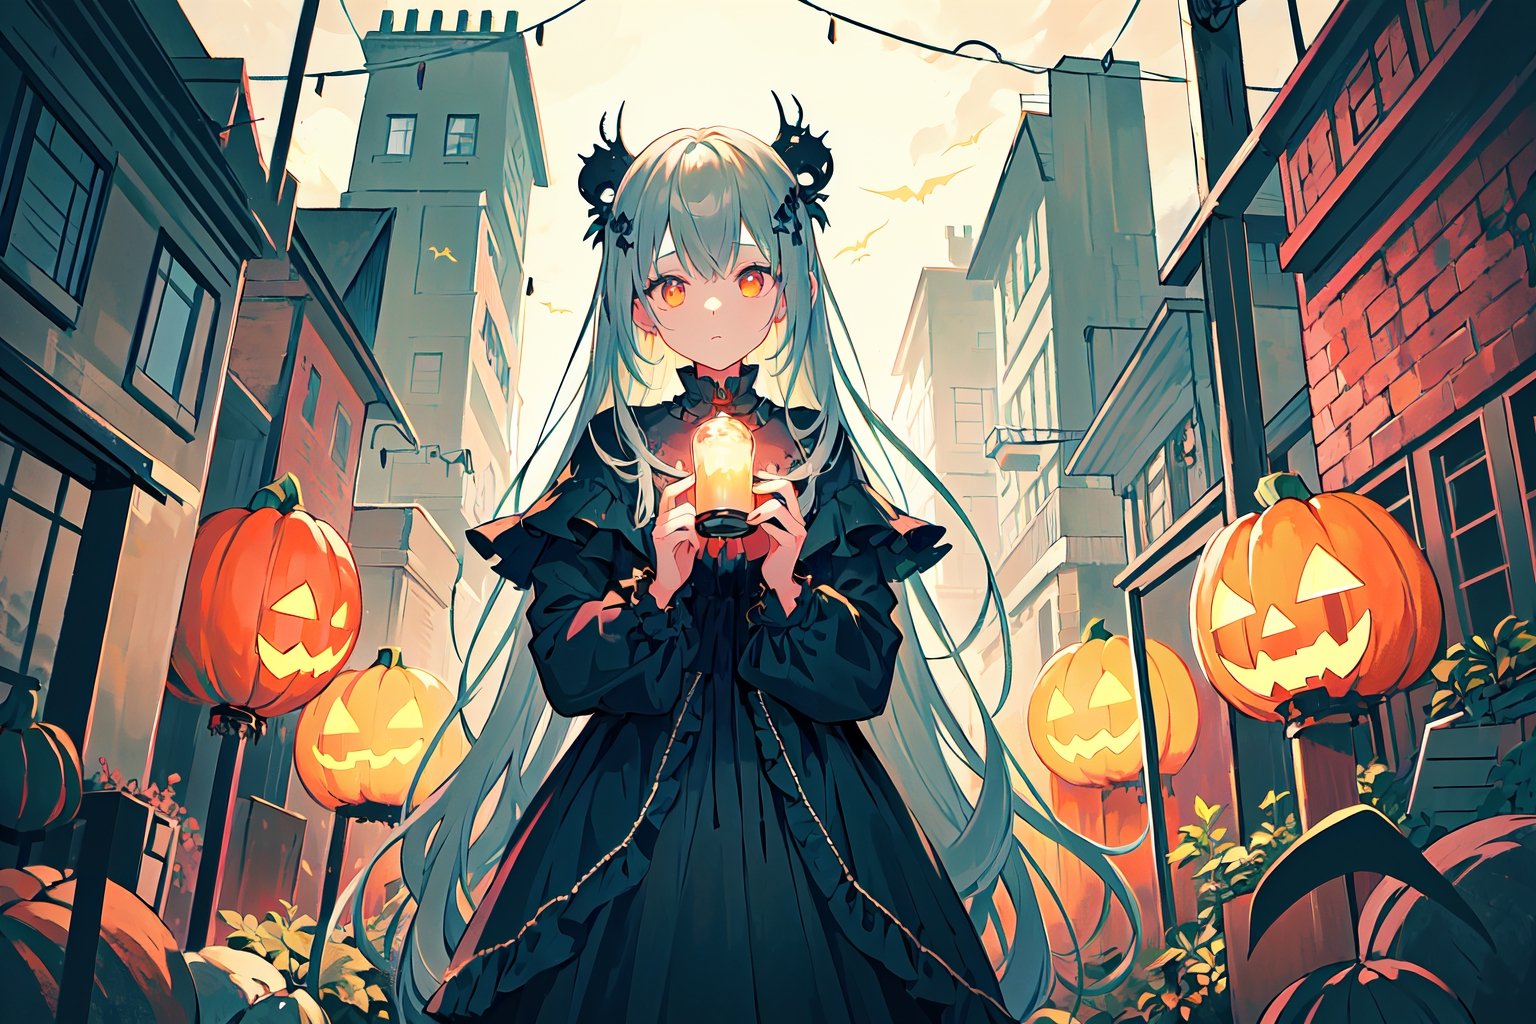 a girl in a Halloween costume, standing in front of a haunting house adorned with eerie decorations. The girl's costume is inspired by the mystical and macabre, with dark colors, flowing fabric, and intricate details. She holds a carved pumpkin, its flickering candle casting an eerie glow on her face. The haunting house behind her is dilapidated, with broken windows and overgrown vines, creating a spooky atmosphere.